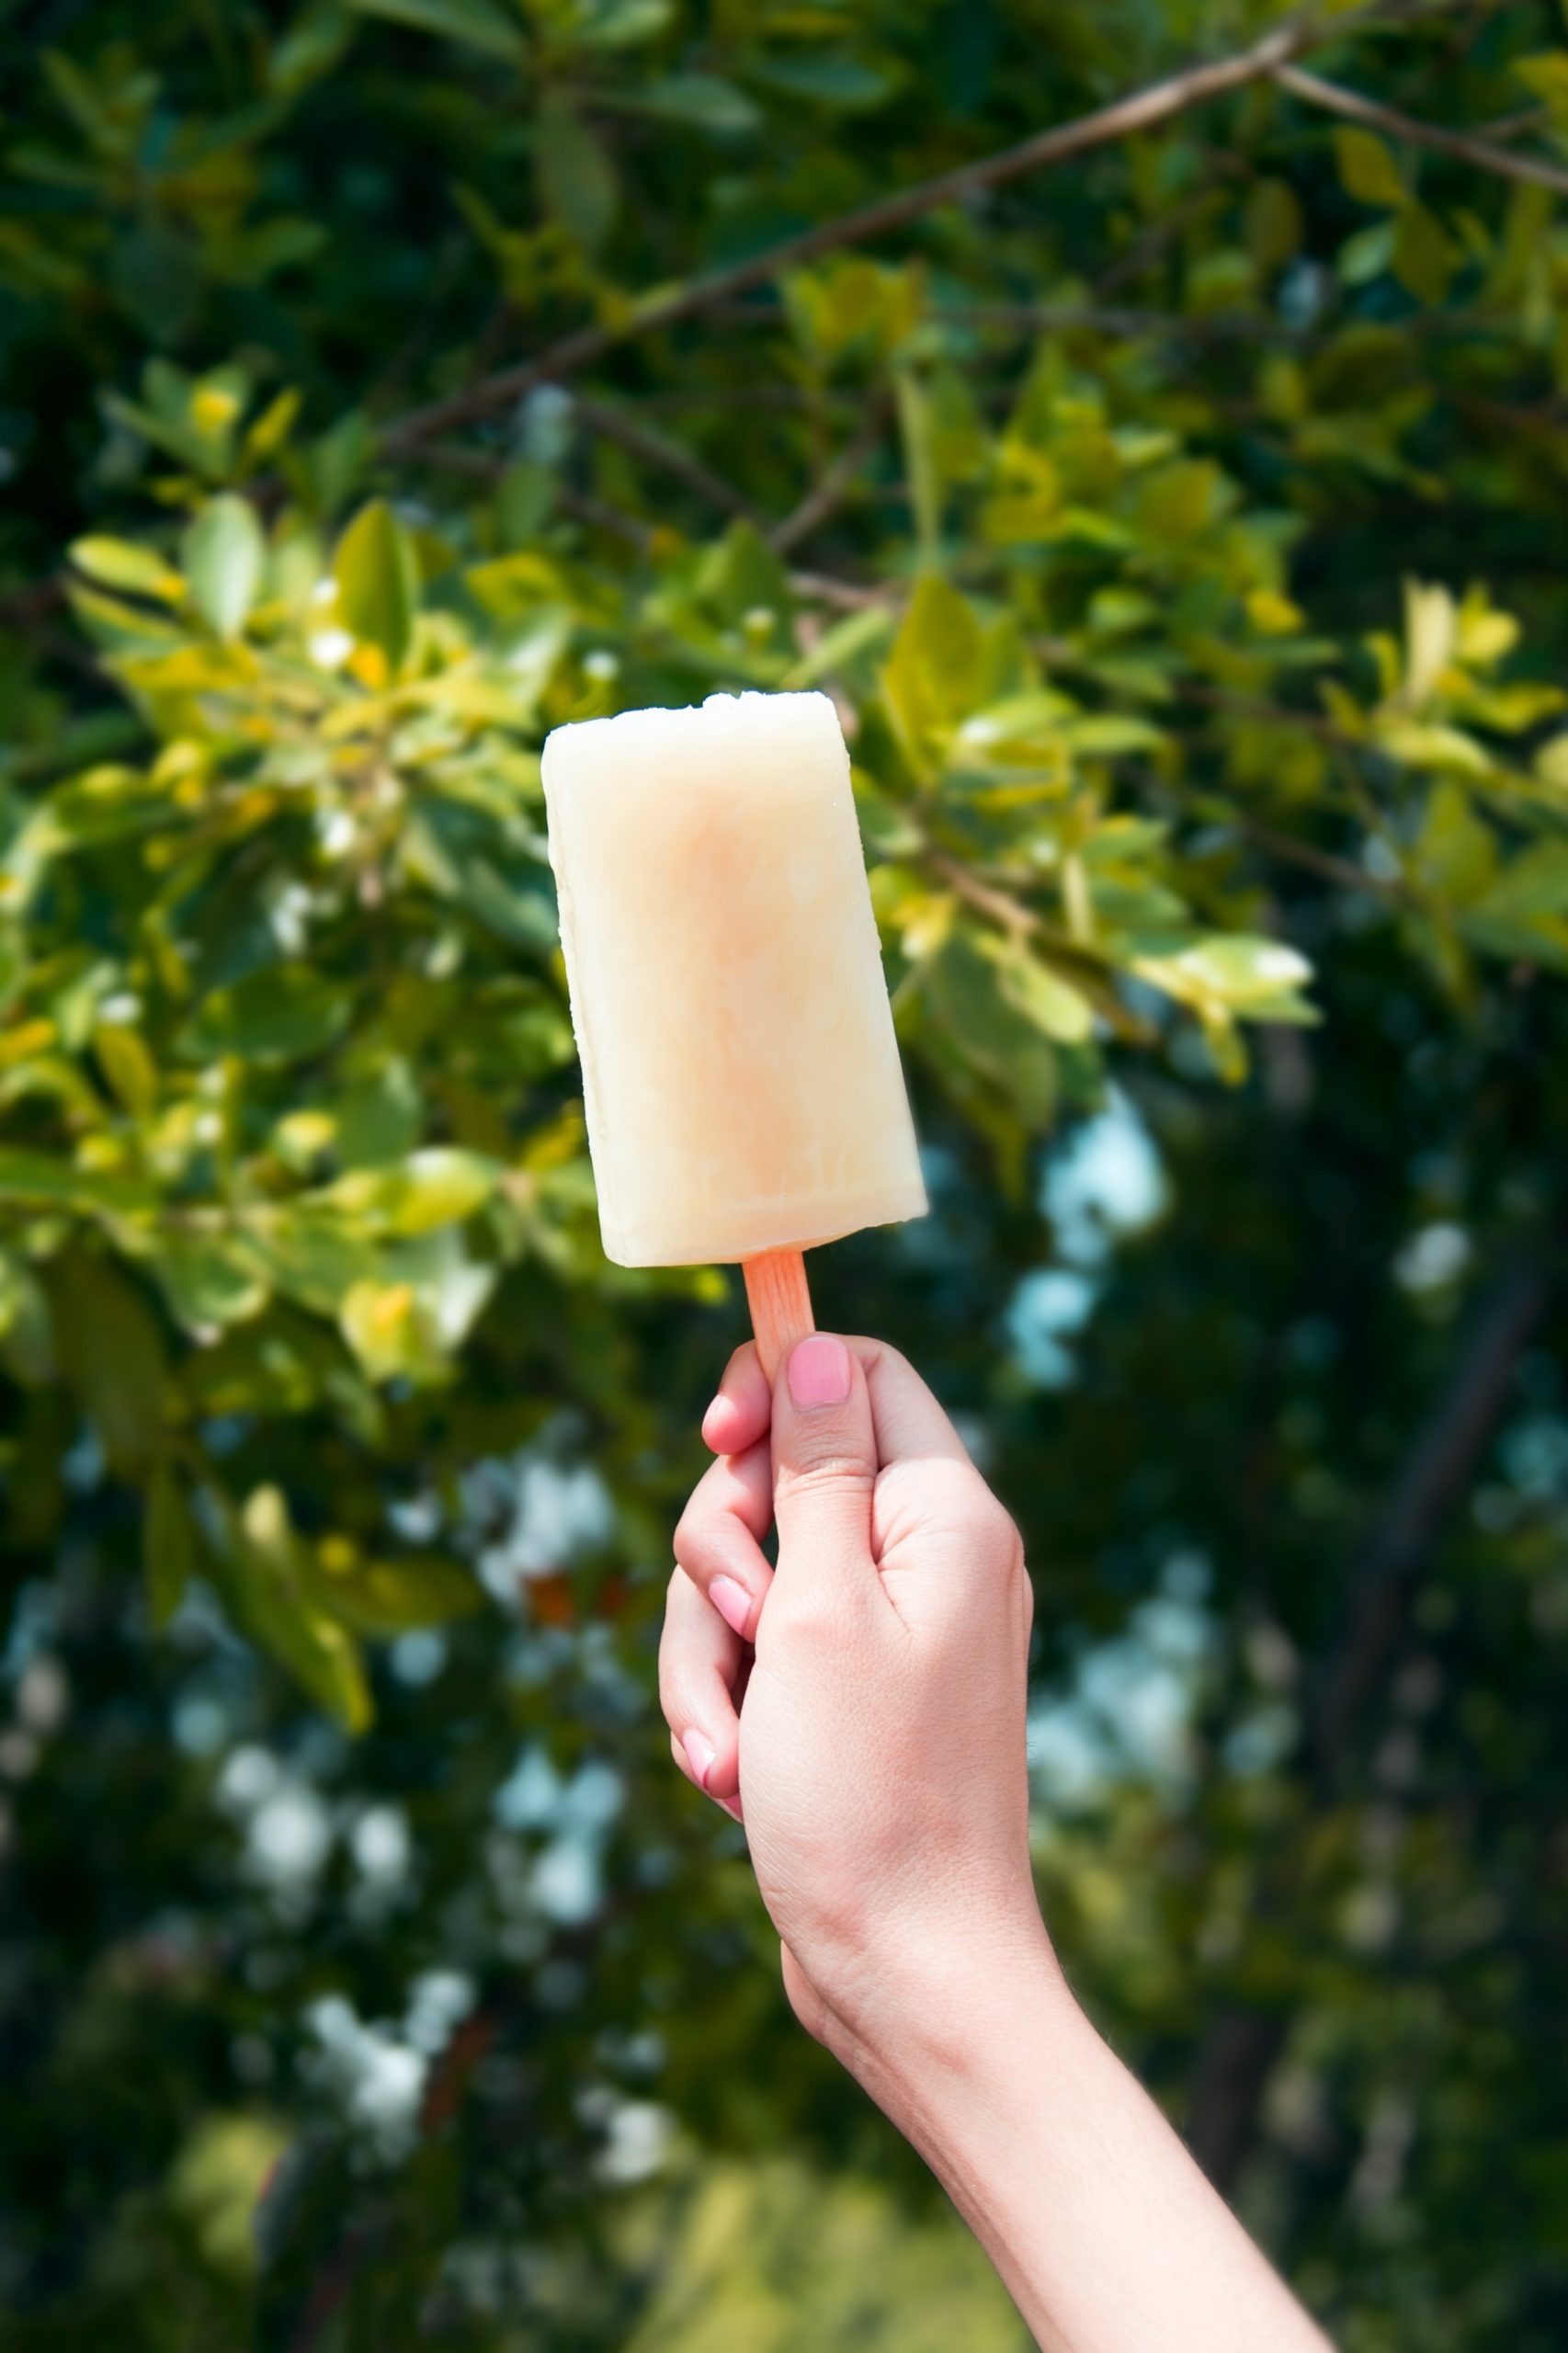 Three Easy Summer Popsicle Recipes